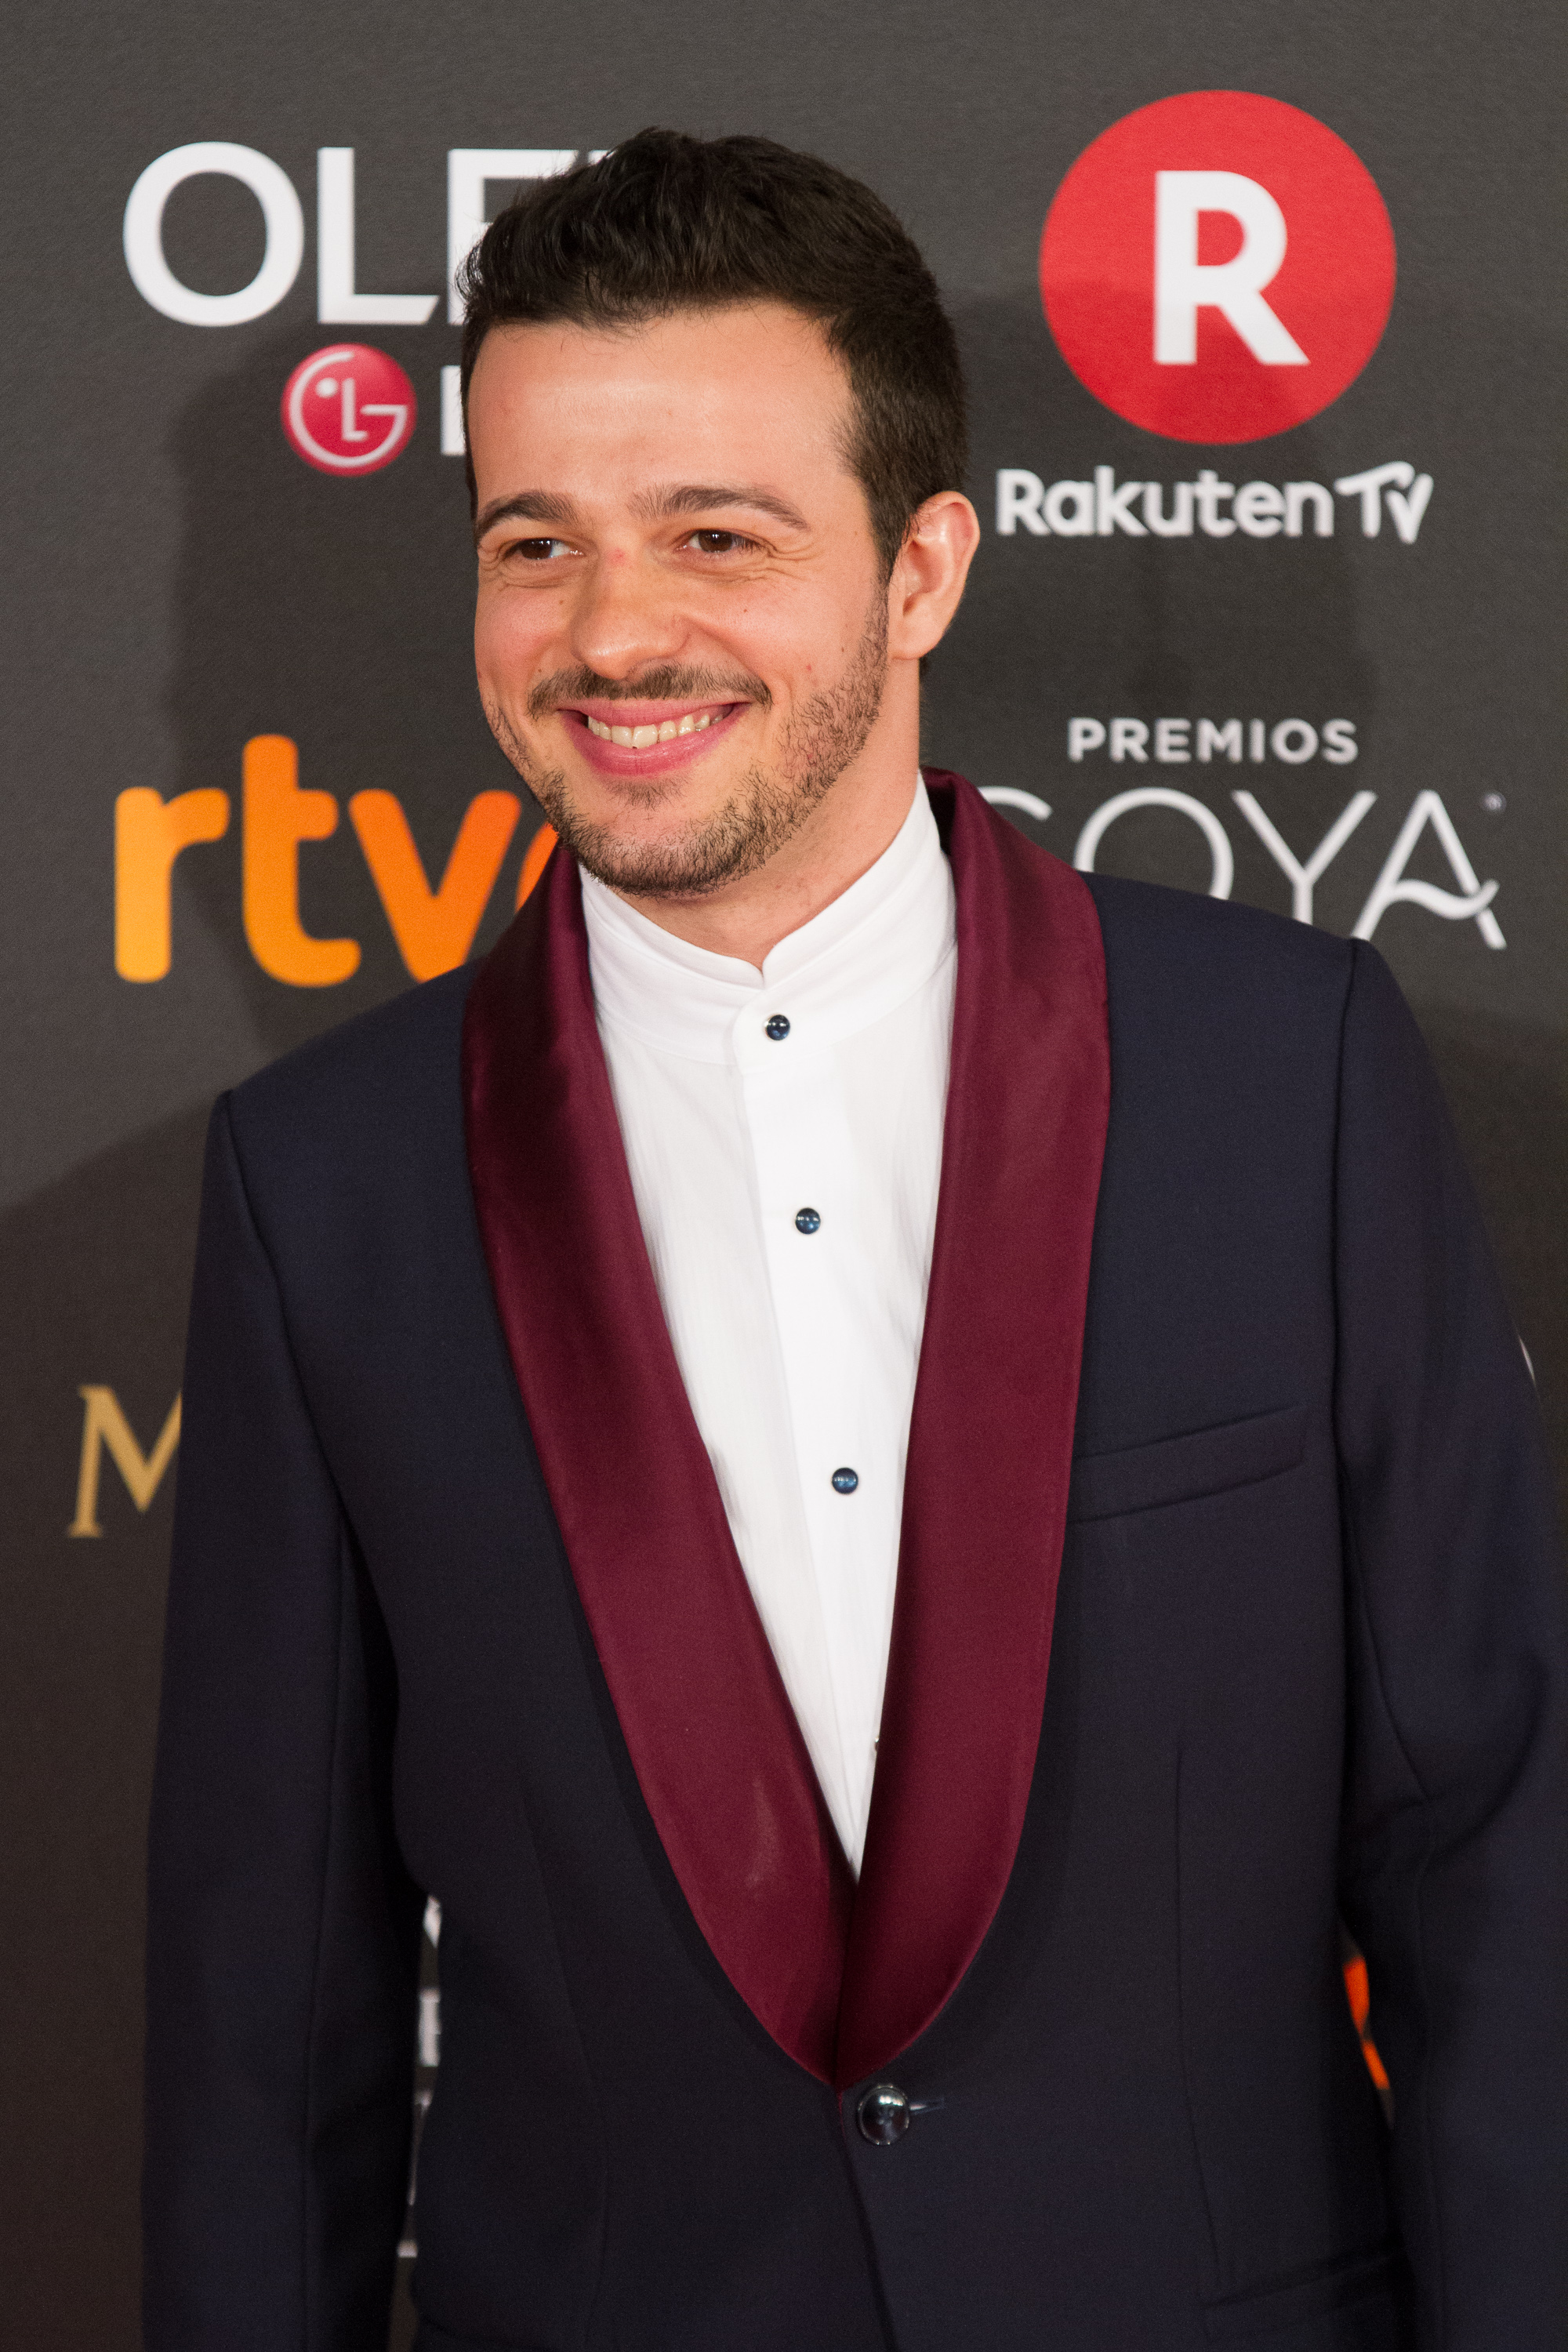 At the [[32nd Goya Awards]] in 2018